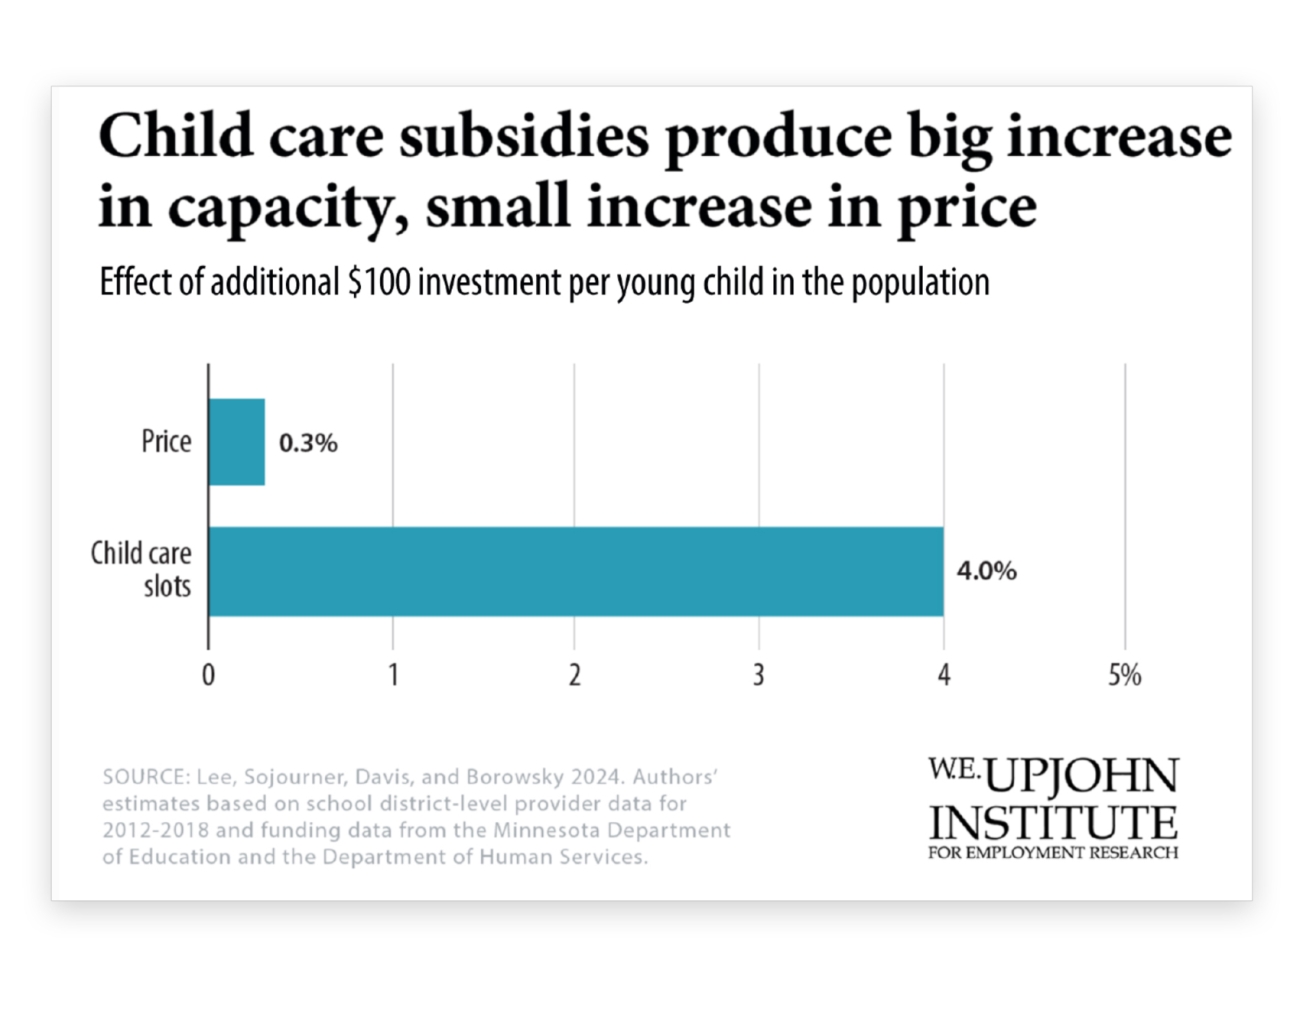 Chart showing response in price (small) and child care slots (large) to additional child care subsidies